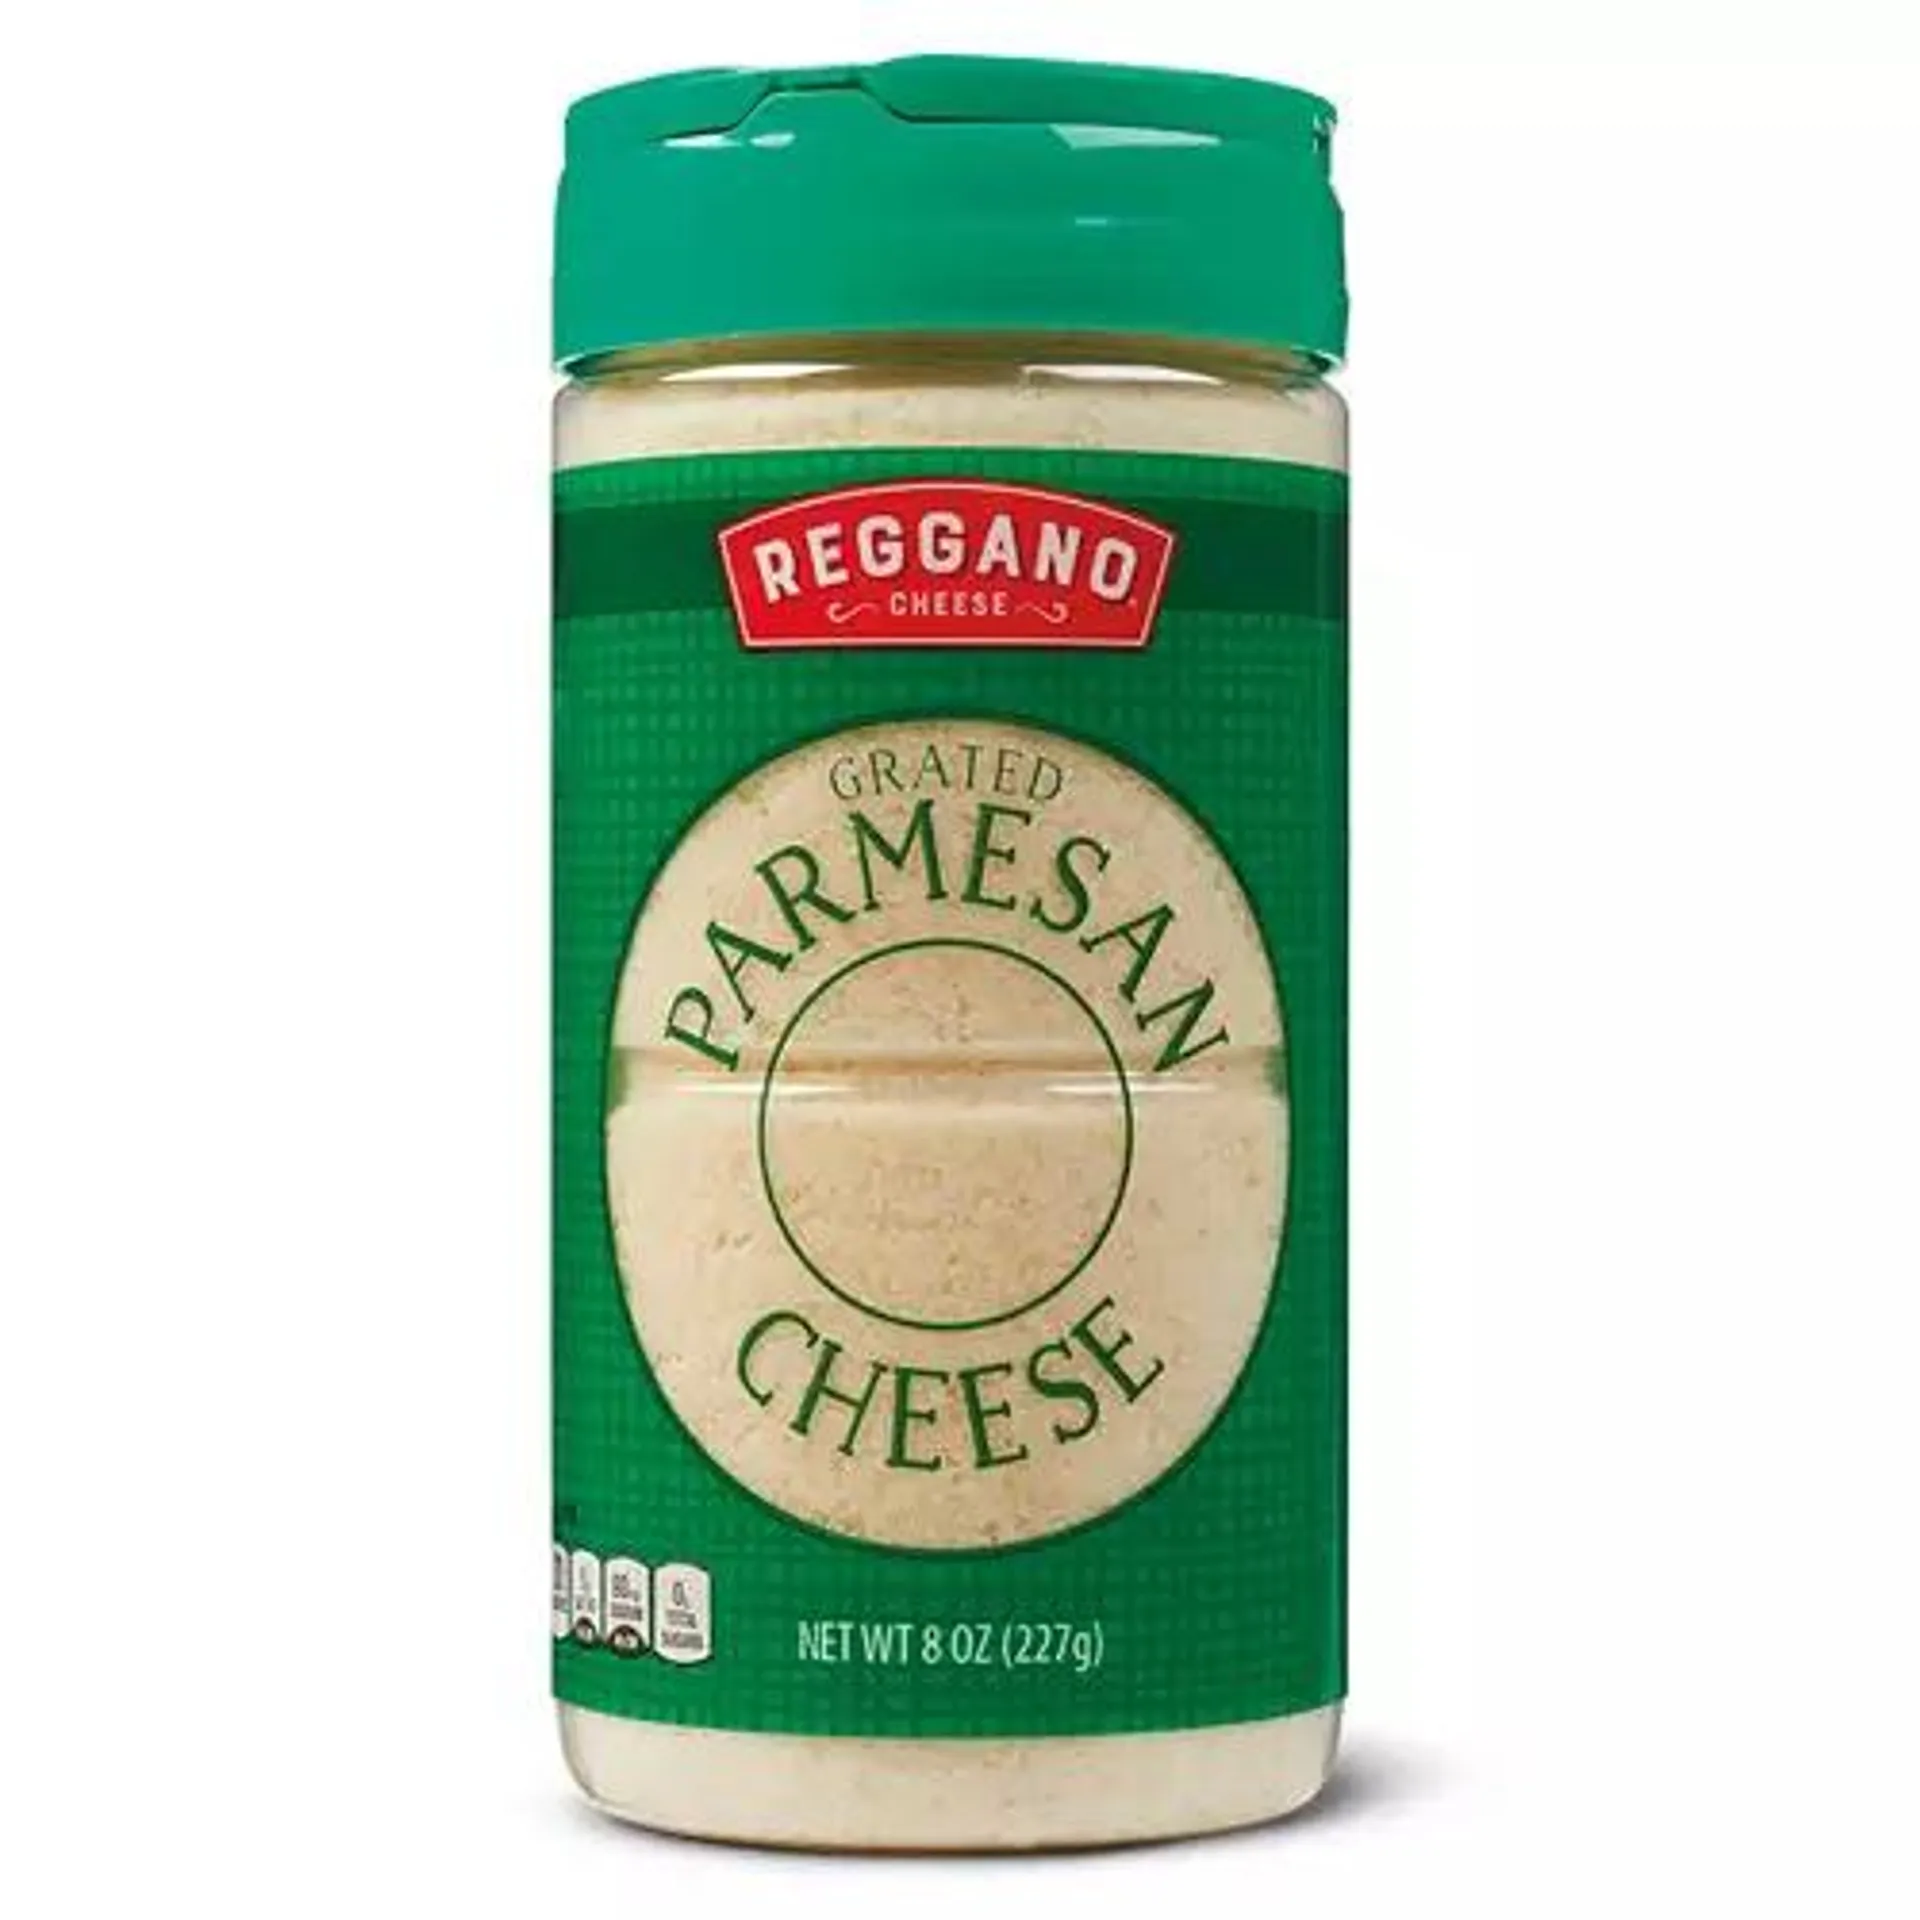 Grated Parmesan Cheese, 8 oz